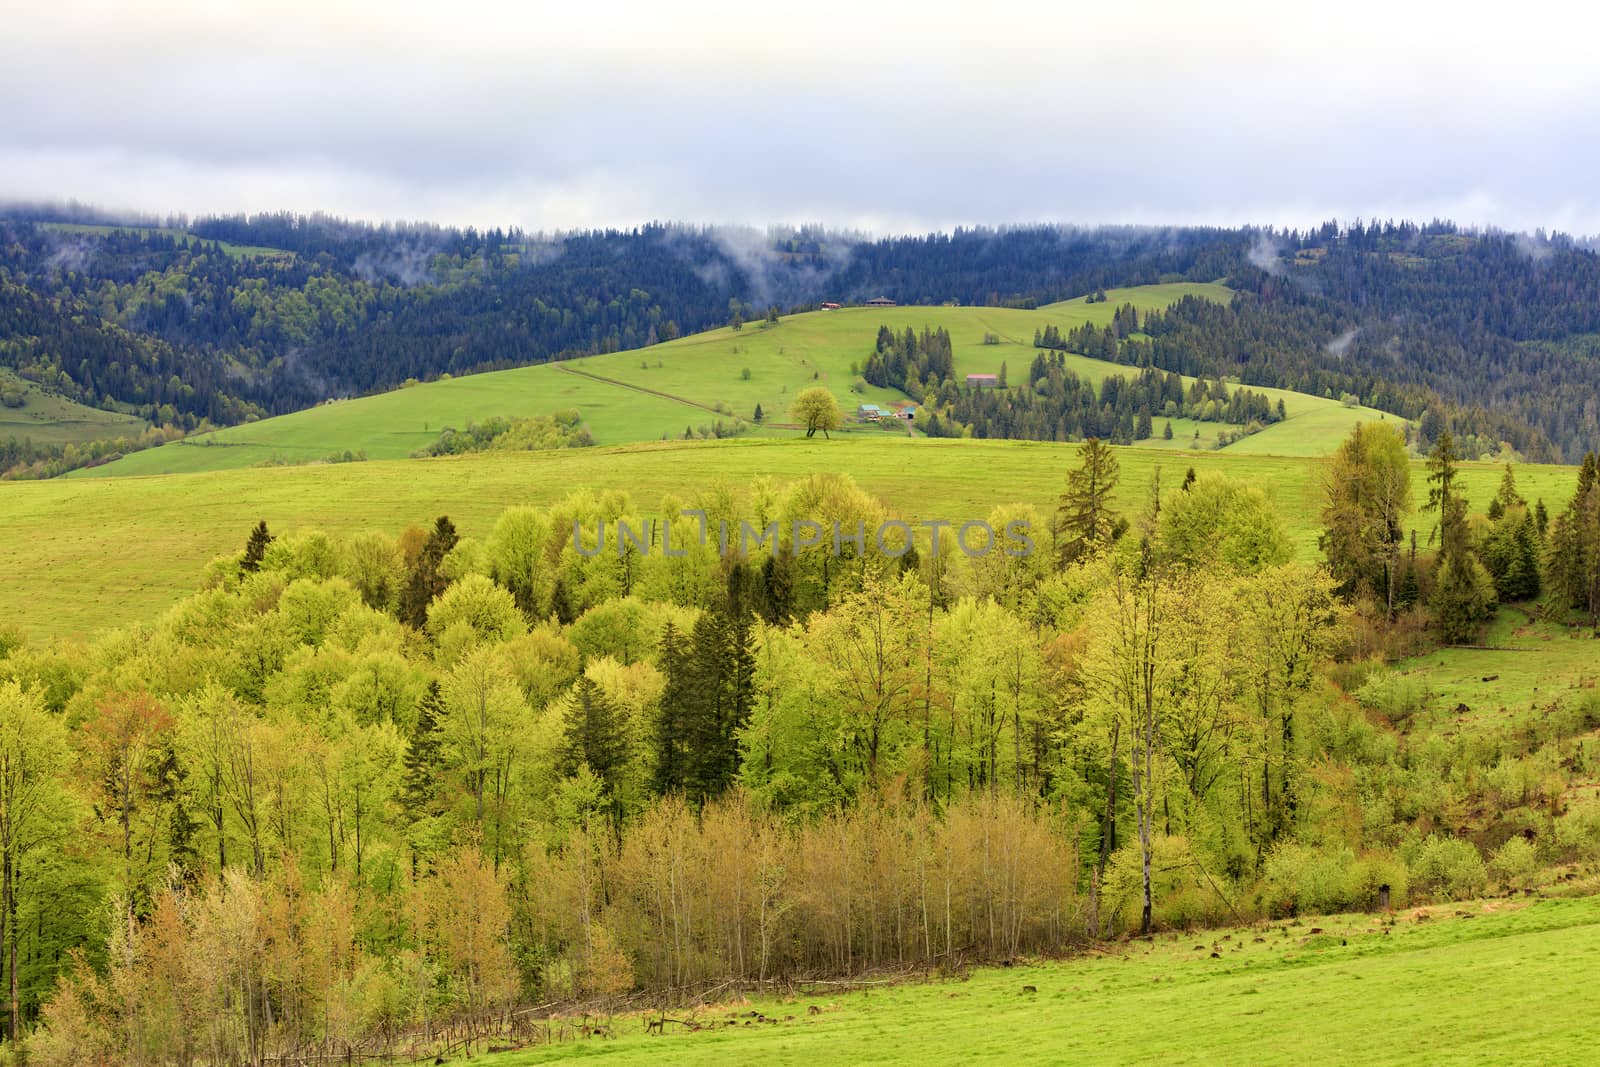 Beautiful view of the spring Carpathians from a height. On the top of the hill there are several rural huts, and the valley is overgrown with young deciduous trees.